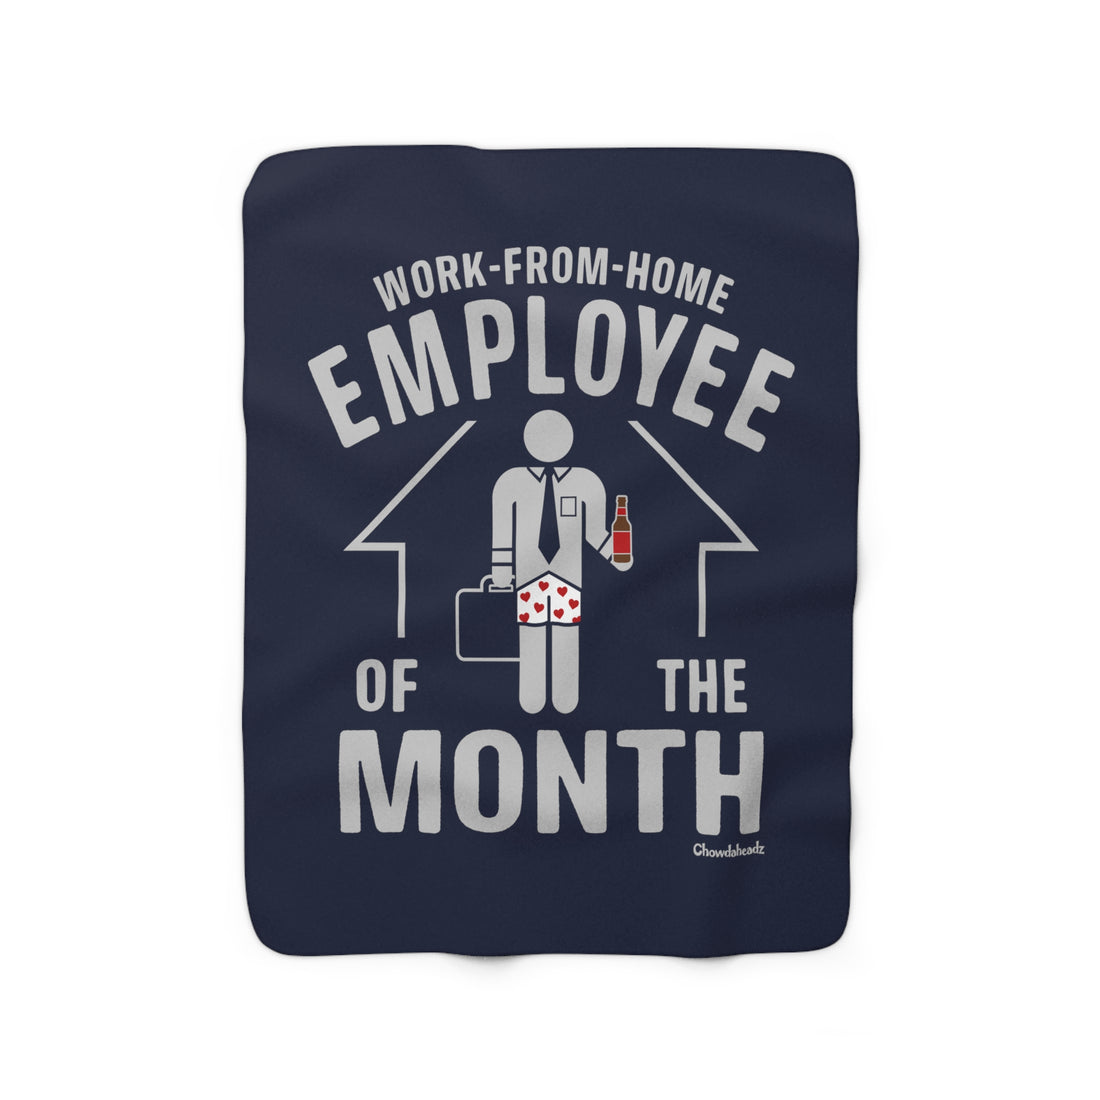 Work-From-Home Employee of the Month Sherpa Fleece Blanket - Navy - Chowdaheadz